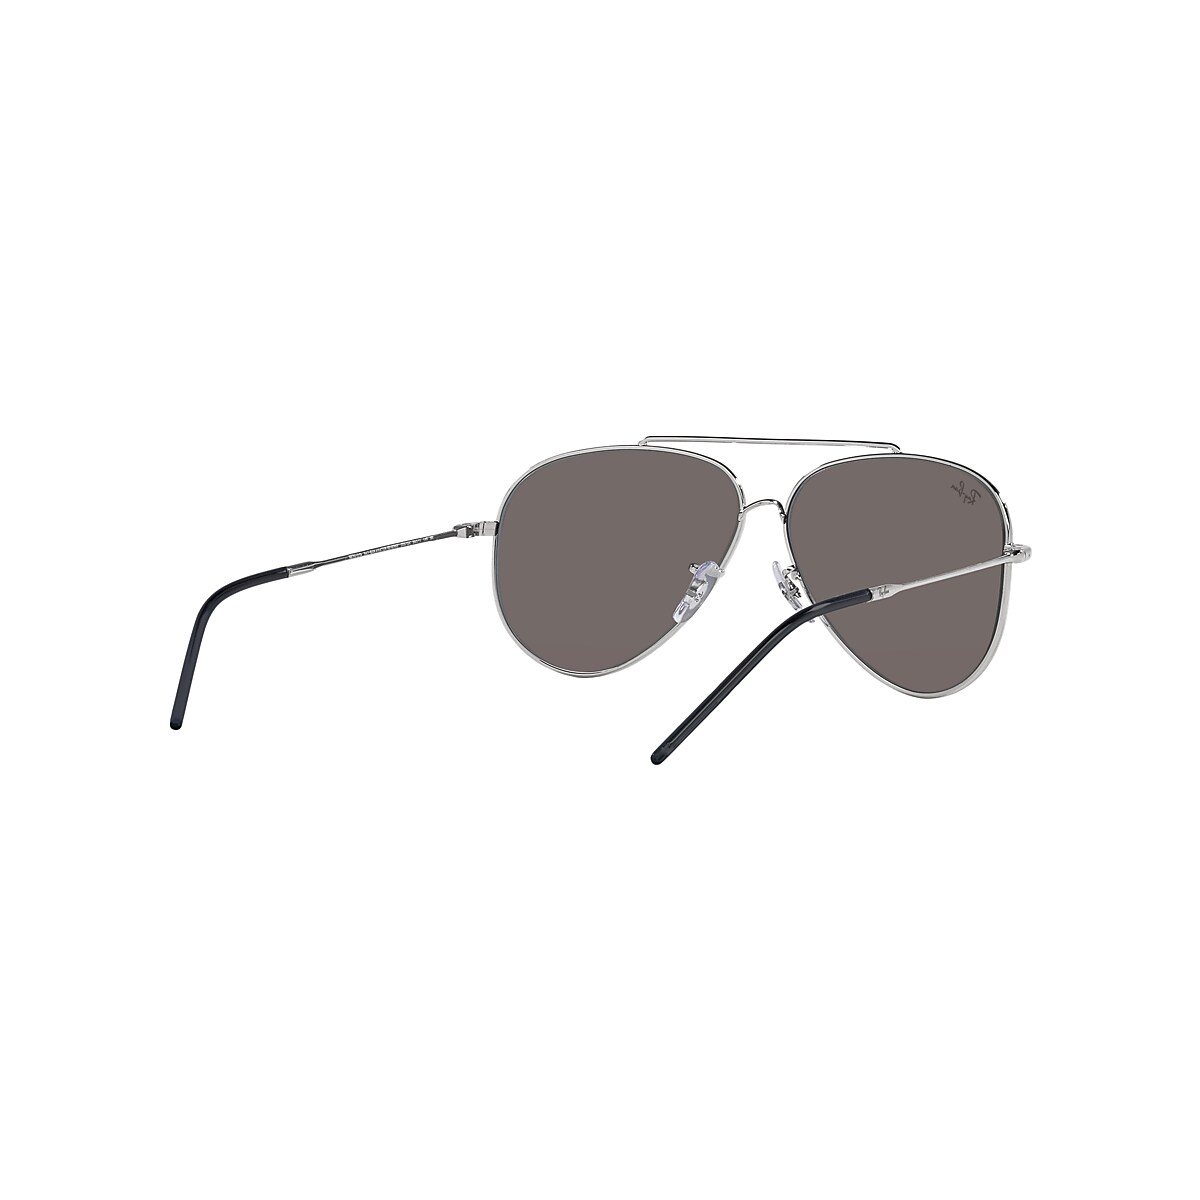 AVIATOR REVERSE Sunglasses in Silver and Light Blue - RBR0101S 